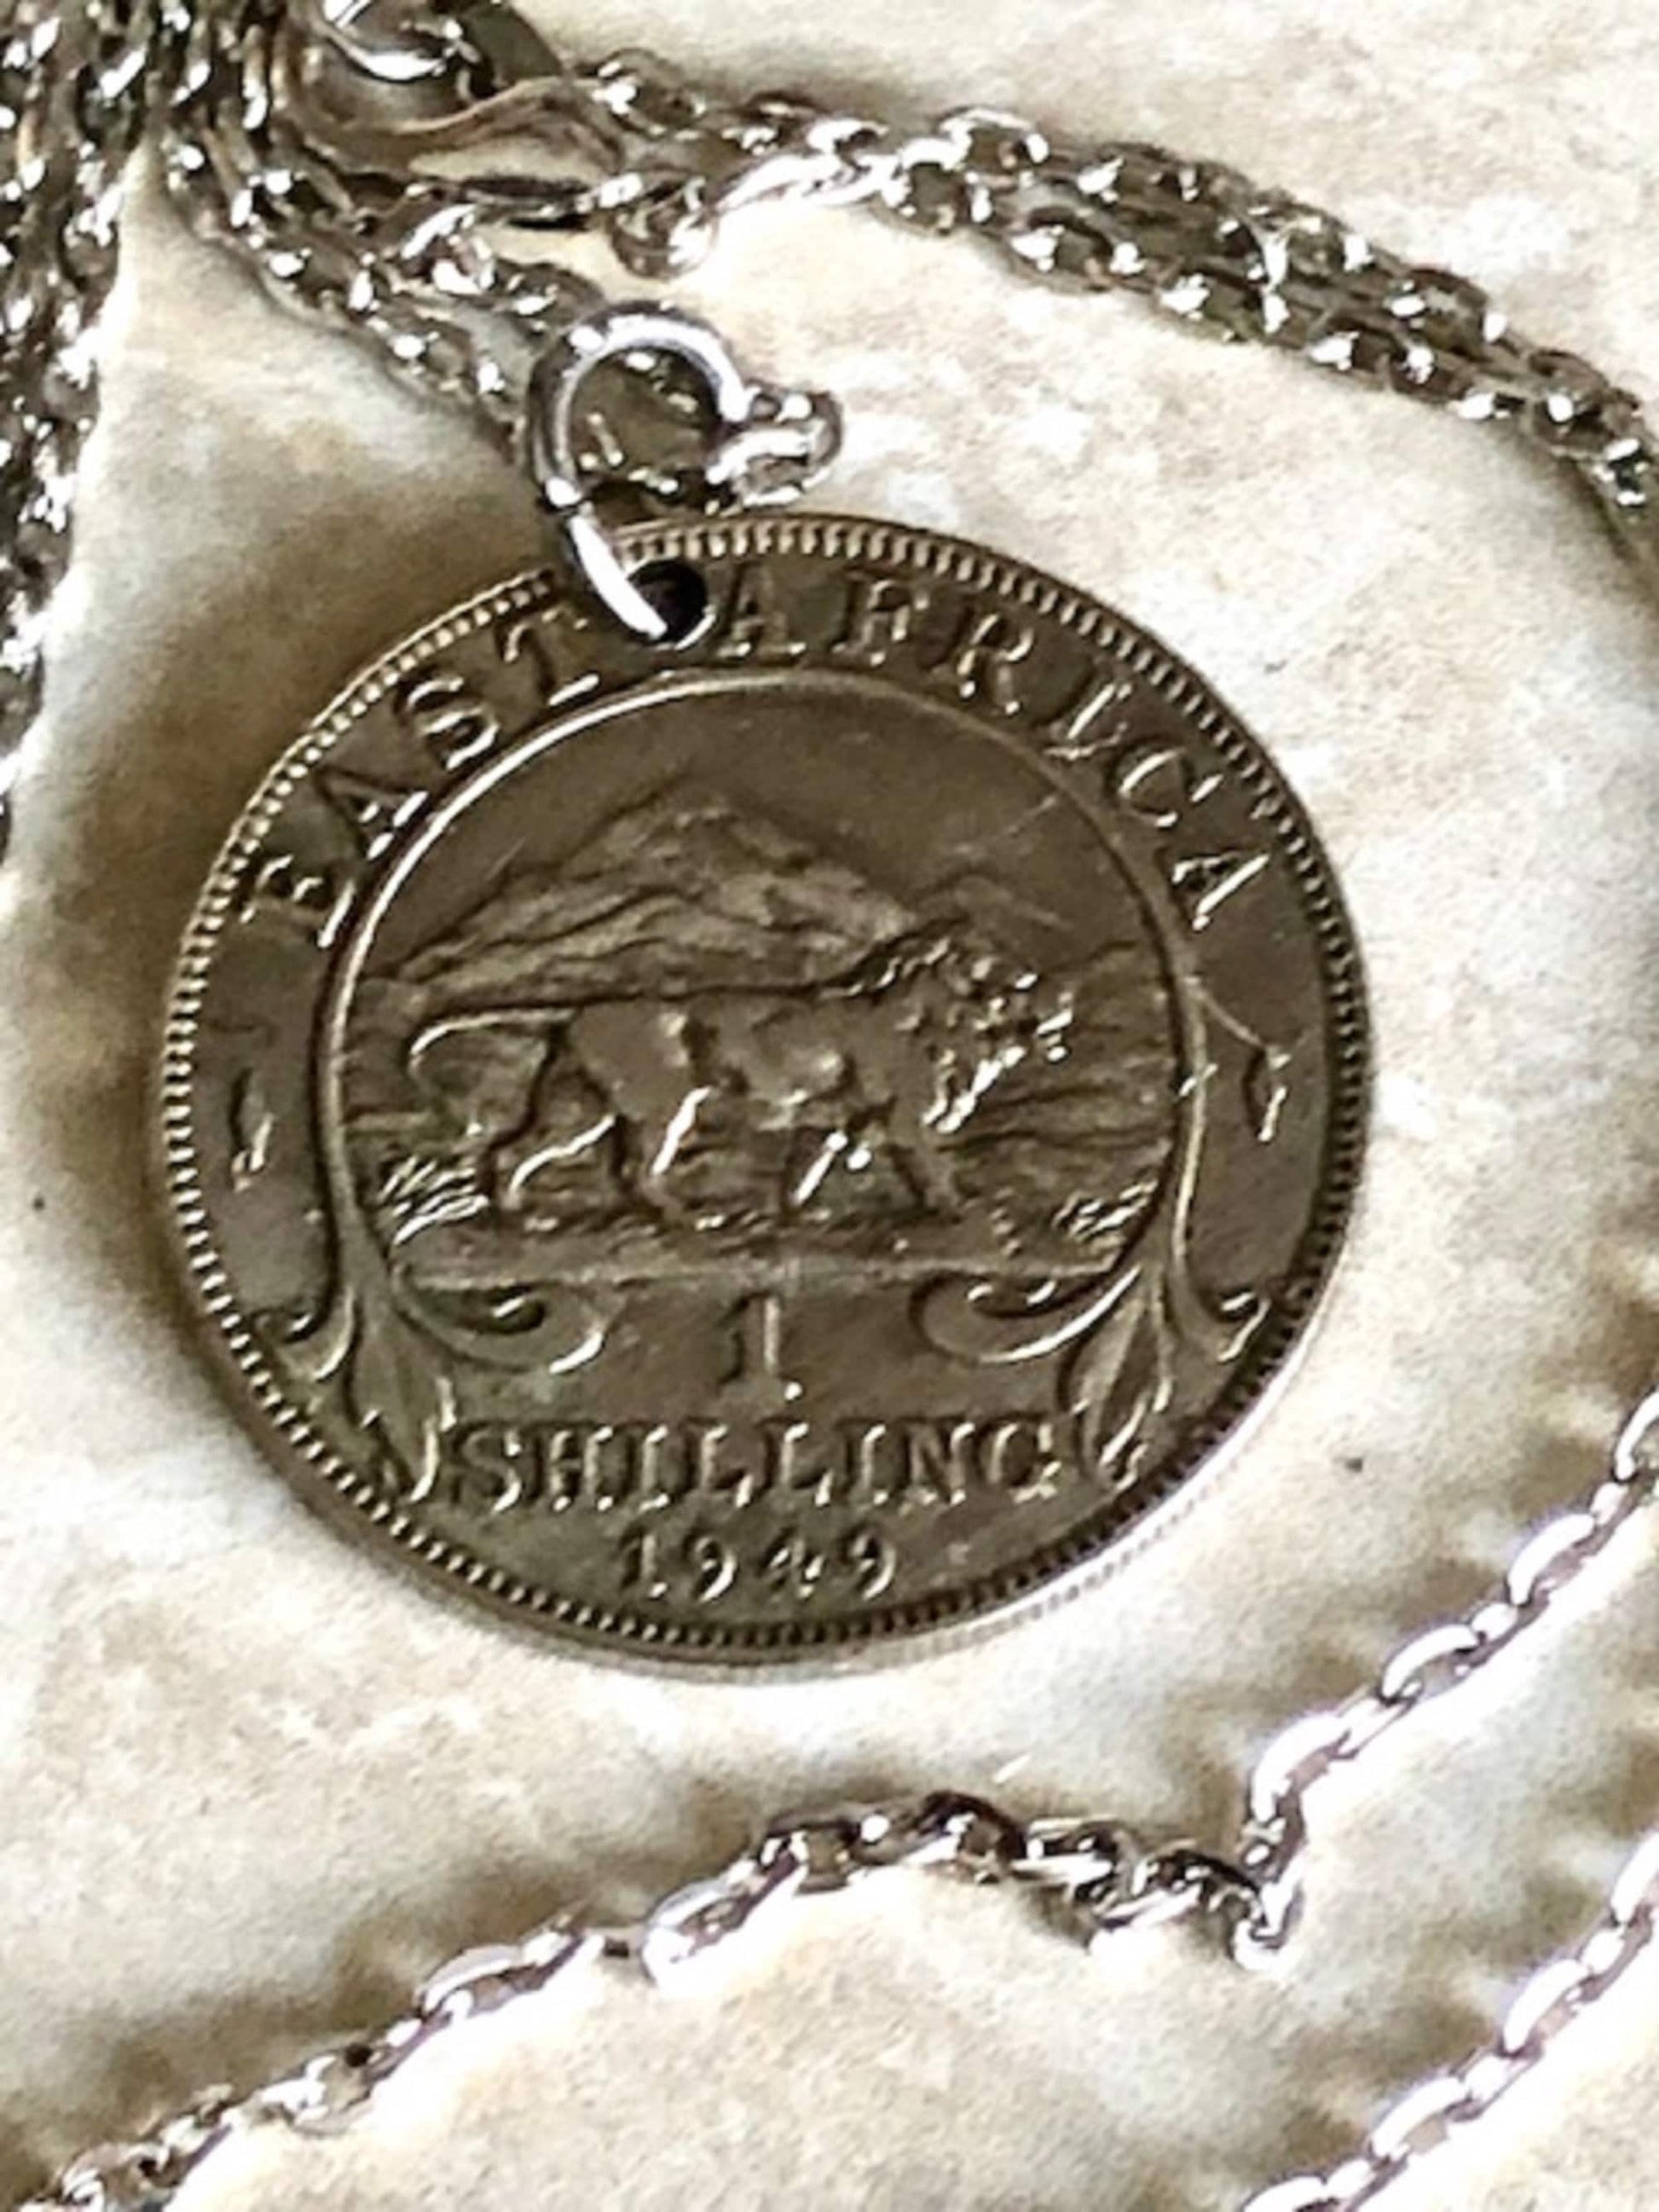 East Africa Coin Necklace 1 Shilling African Personal Necklace Handmade Jewelry Gift Friend Charm For Him Her World Coin Collector